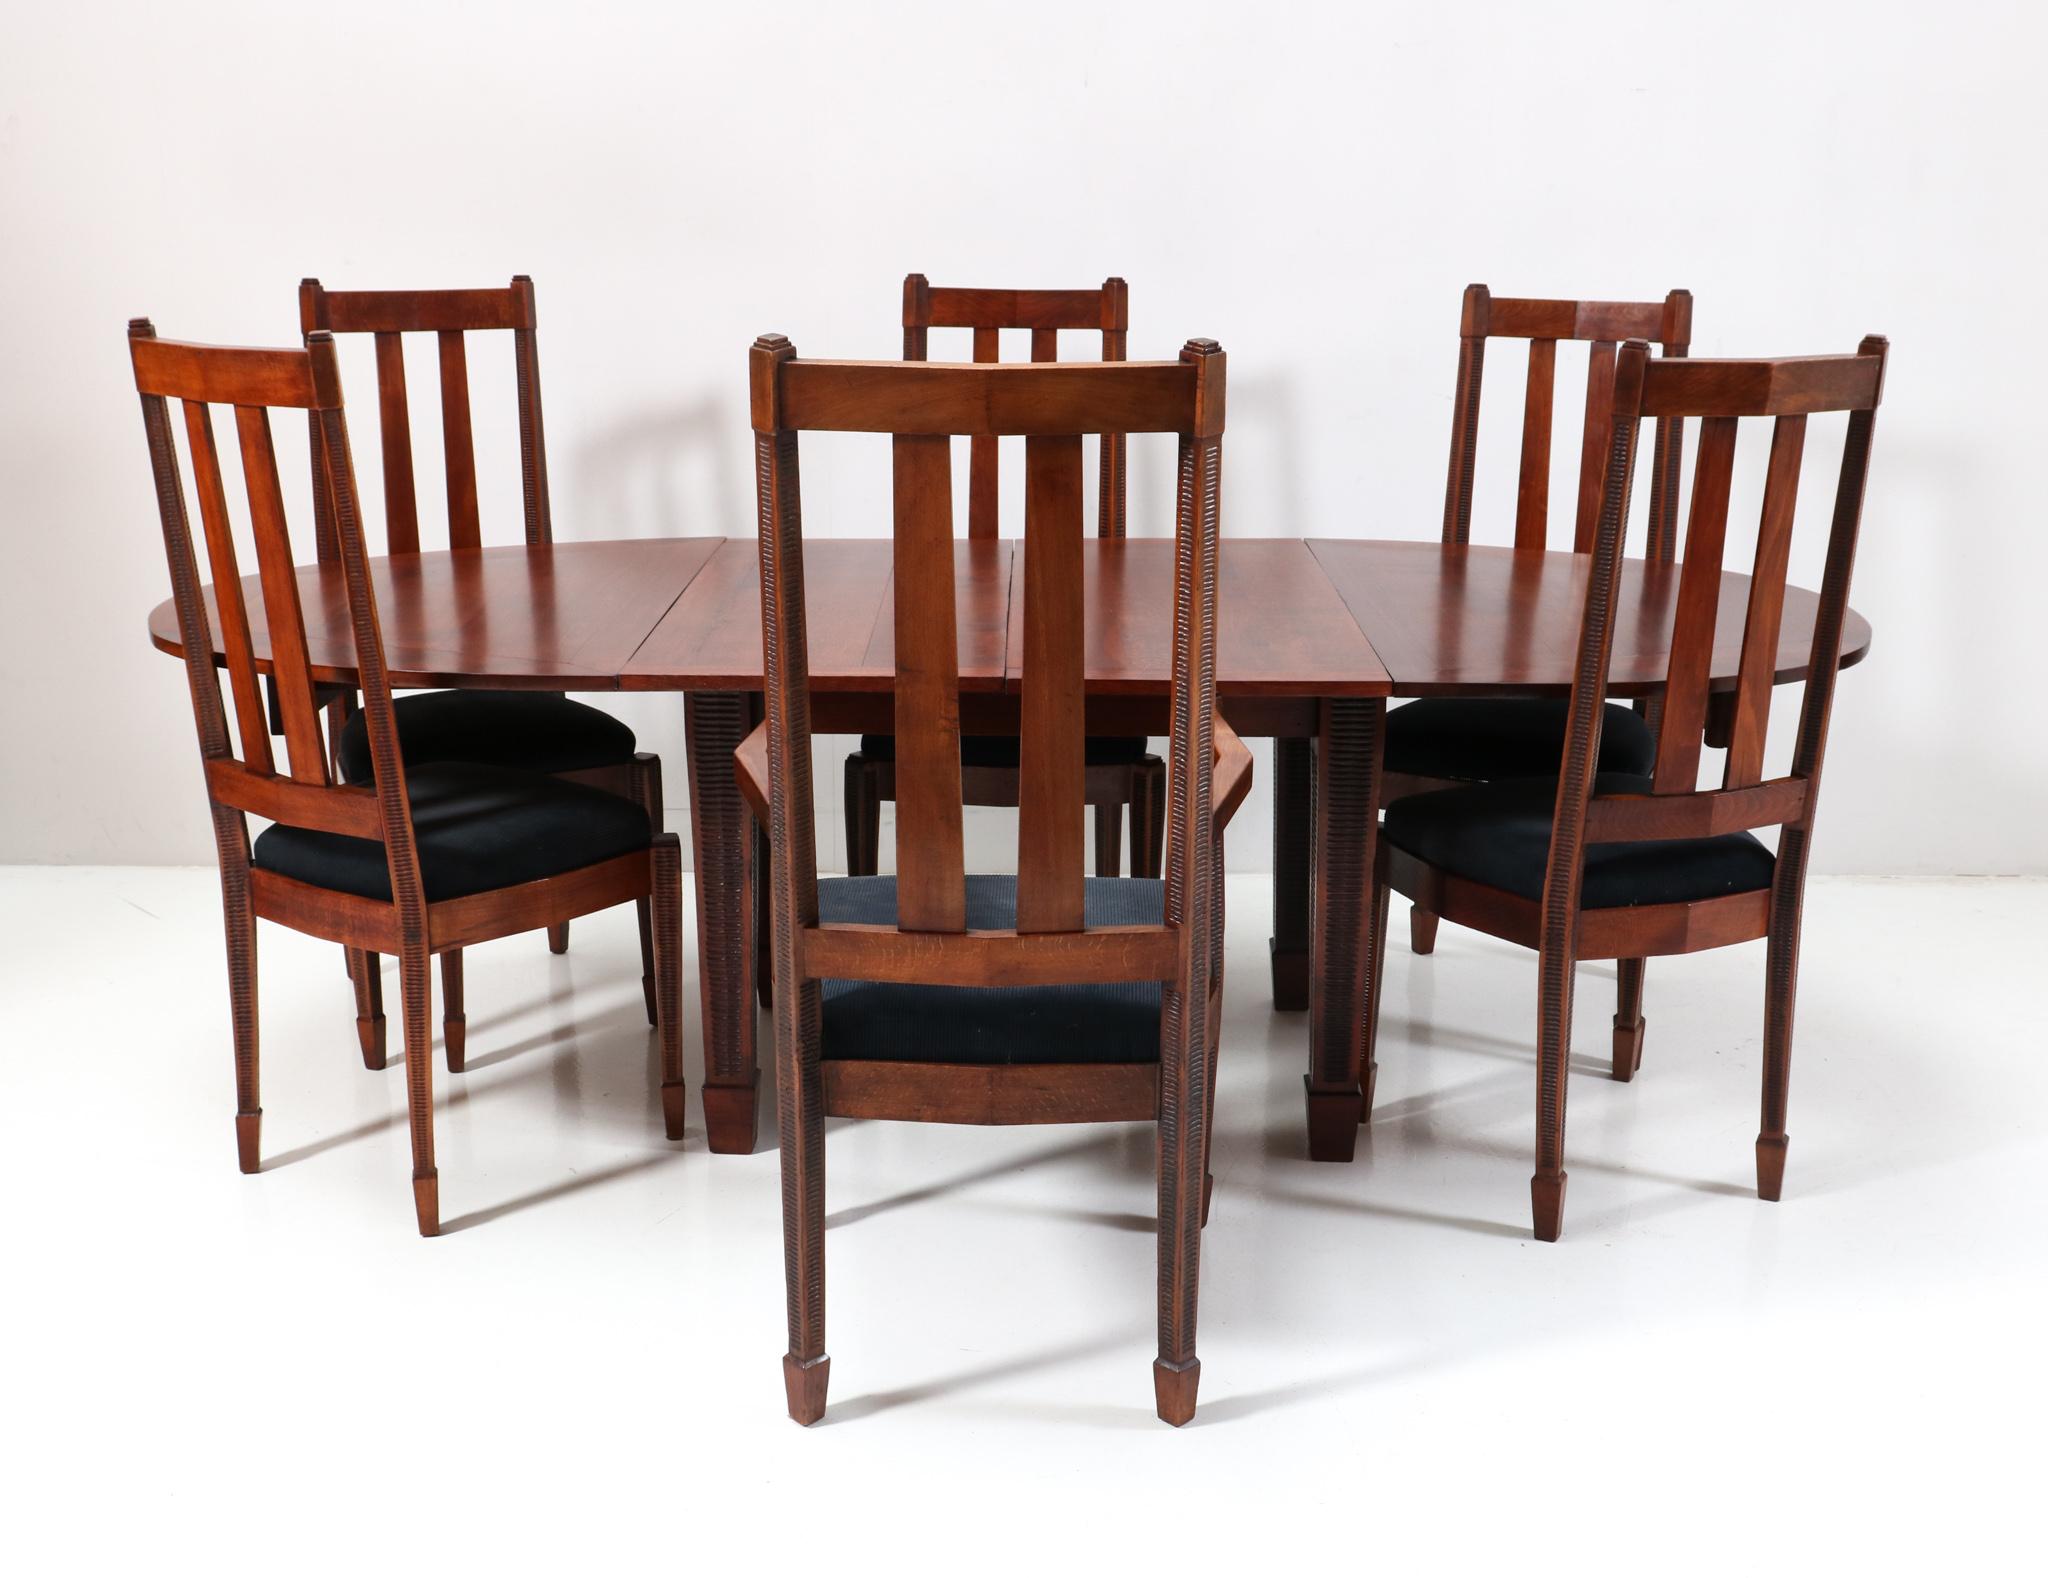 Set of Six Art Deco Amsterdamse School High Back Dining Room Chairs, 1920s For Sale 7